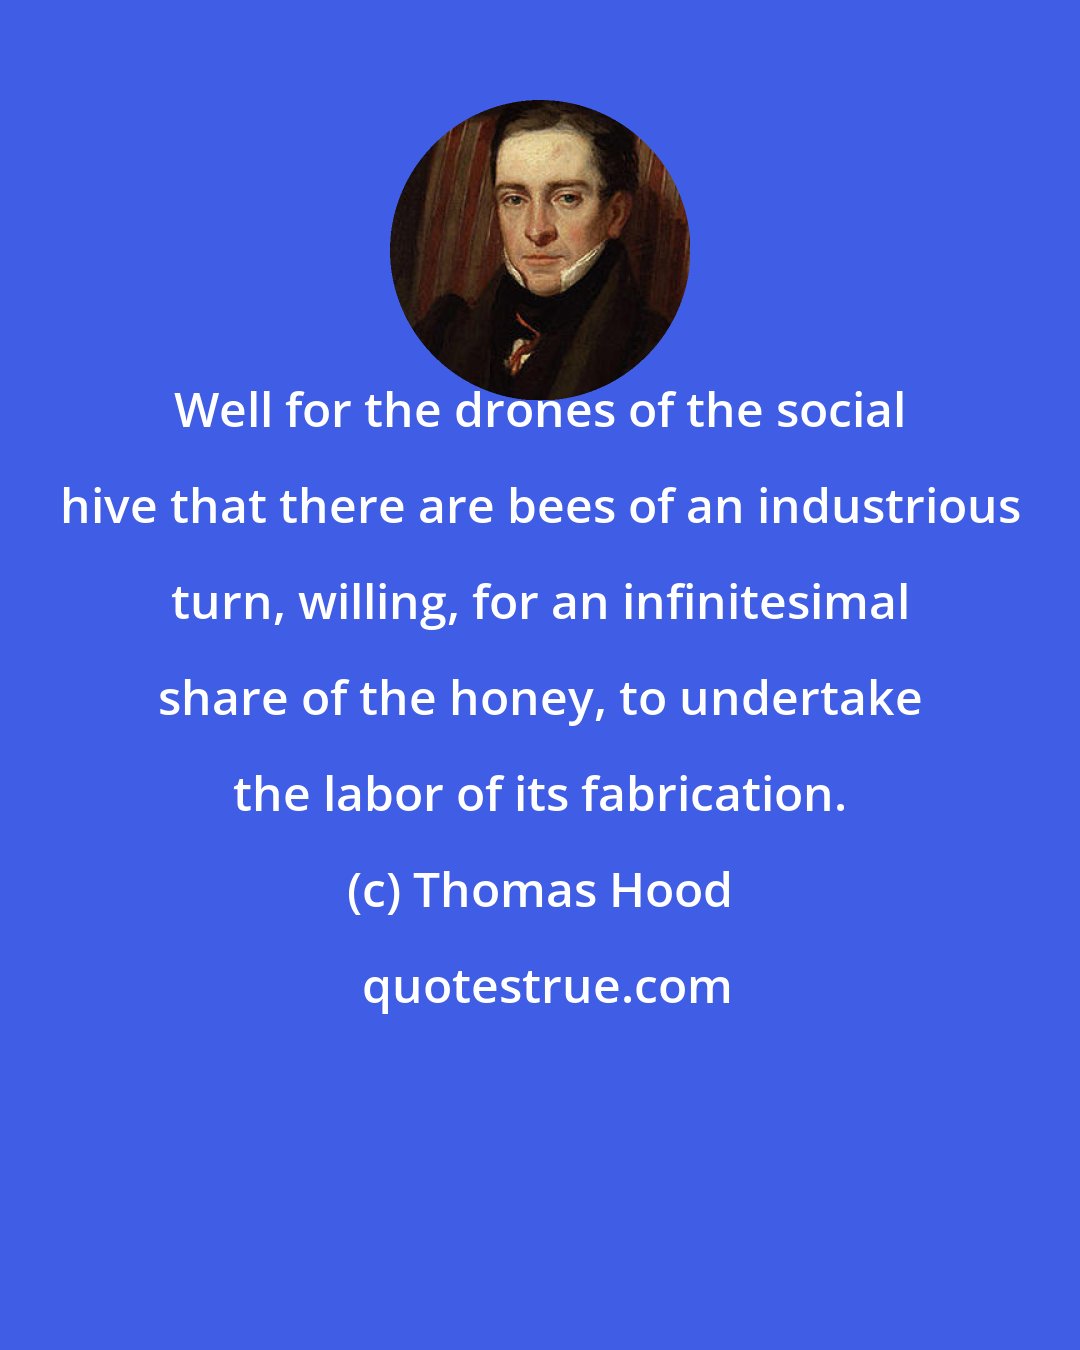 Thomas Hood: Well for the drones of the social hive that there are bees of an industrious turn, willing, for an infinitesimal share of the honey, to undertake the labor of its fabrication.